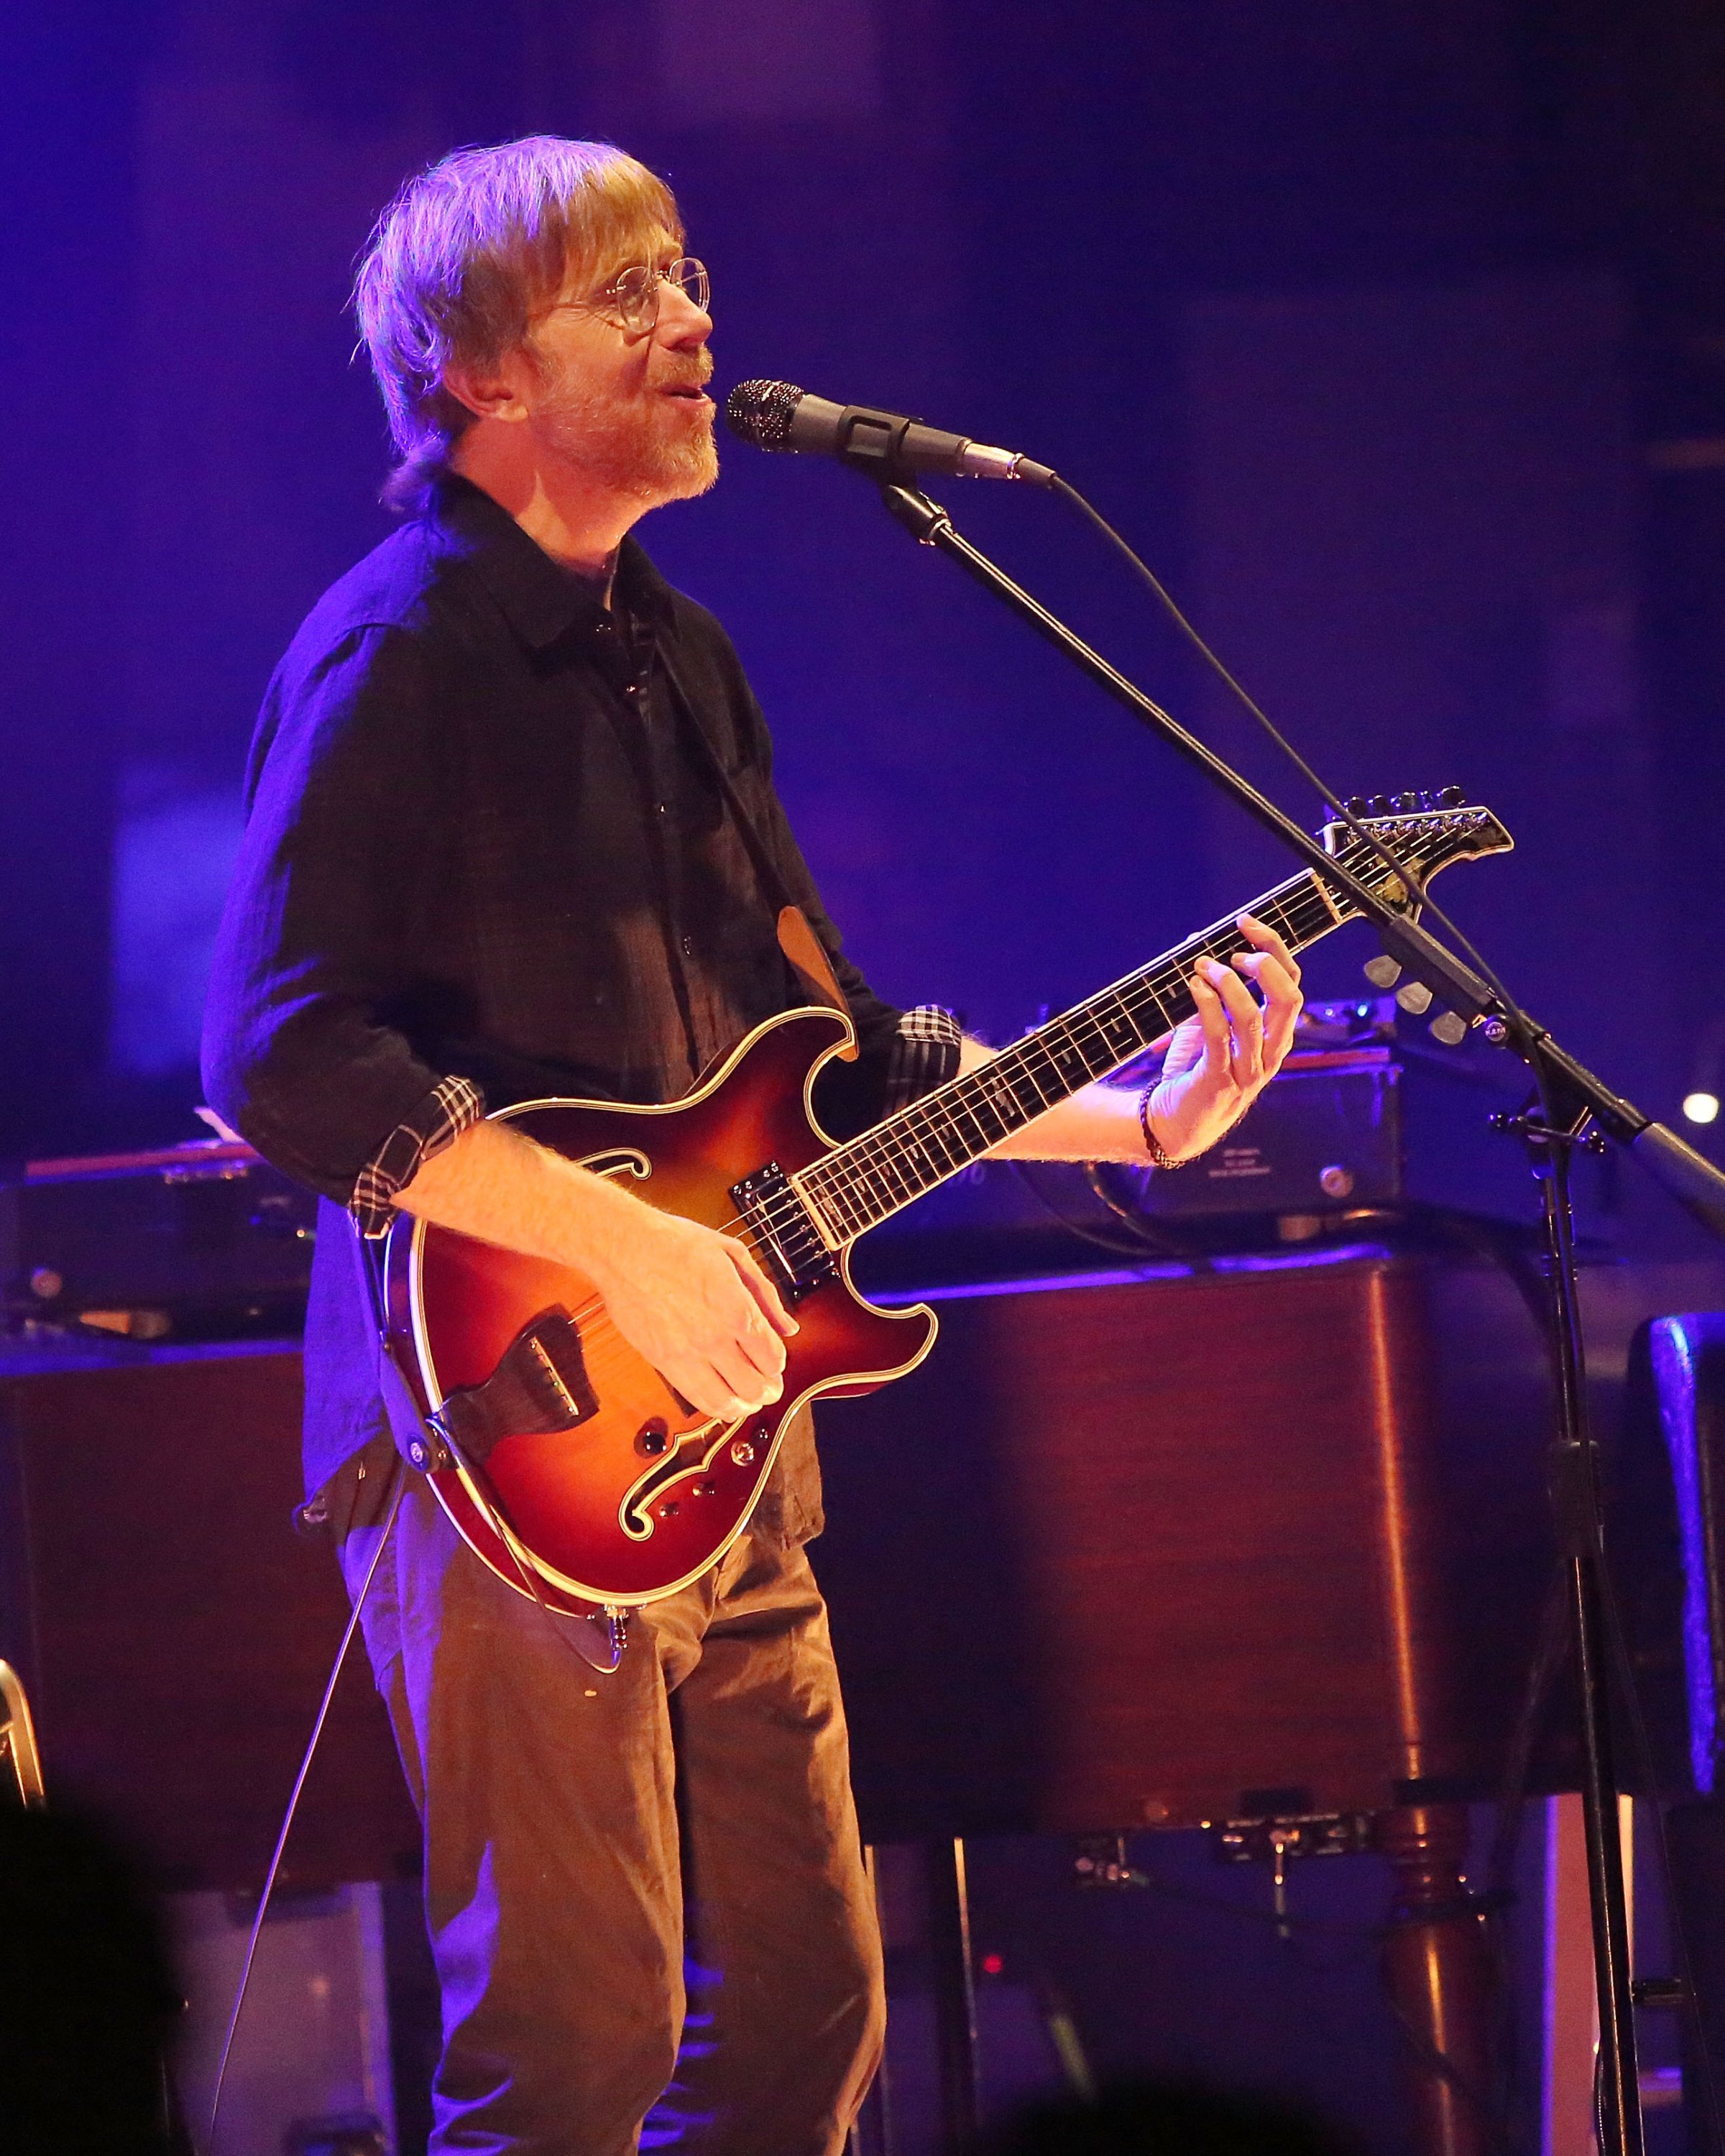 at Beacon Theatre on December 11, 2014 in New York City.